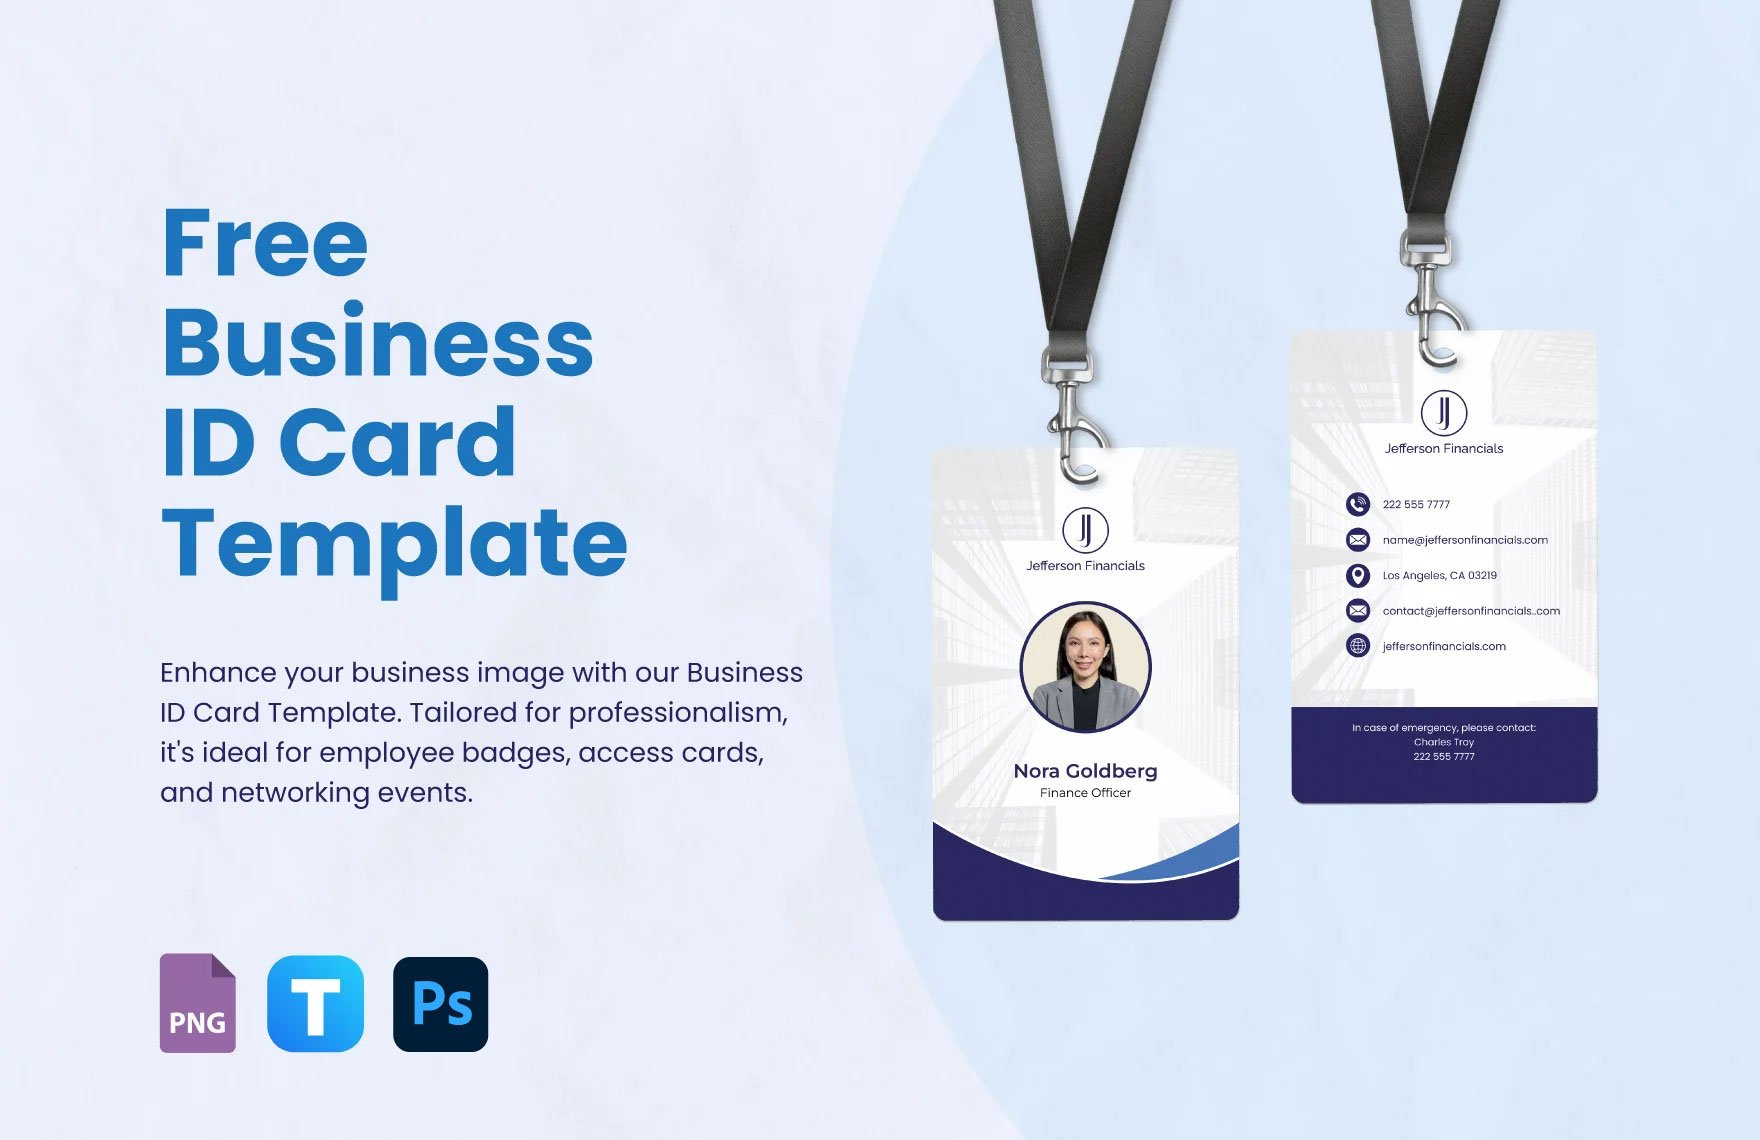 Free Business ID Card Template in PSD, PNG